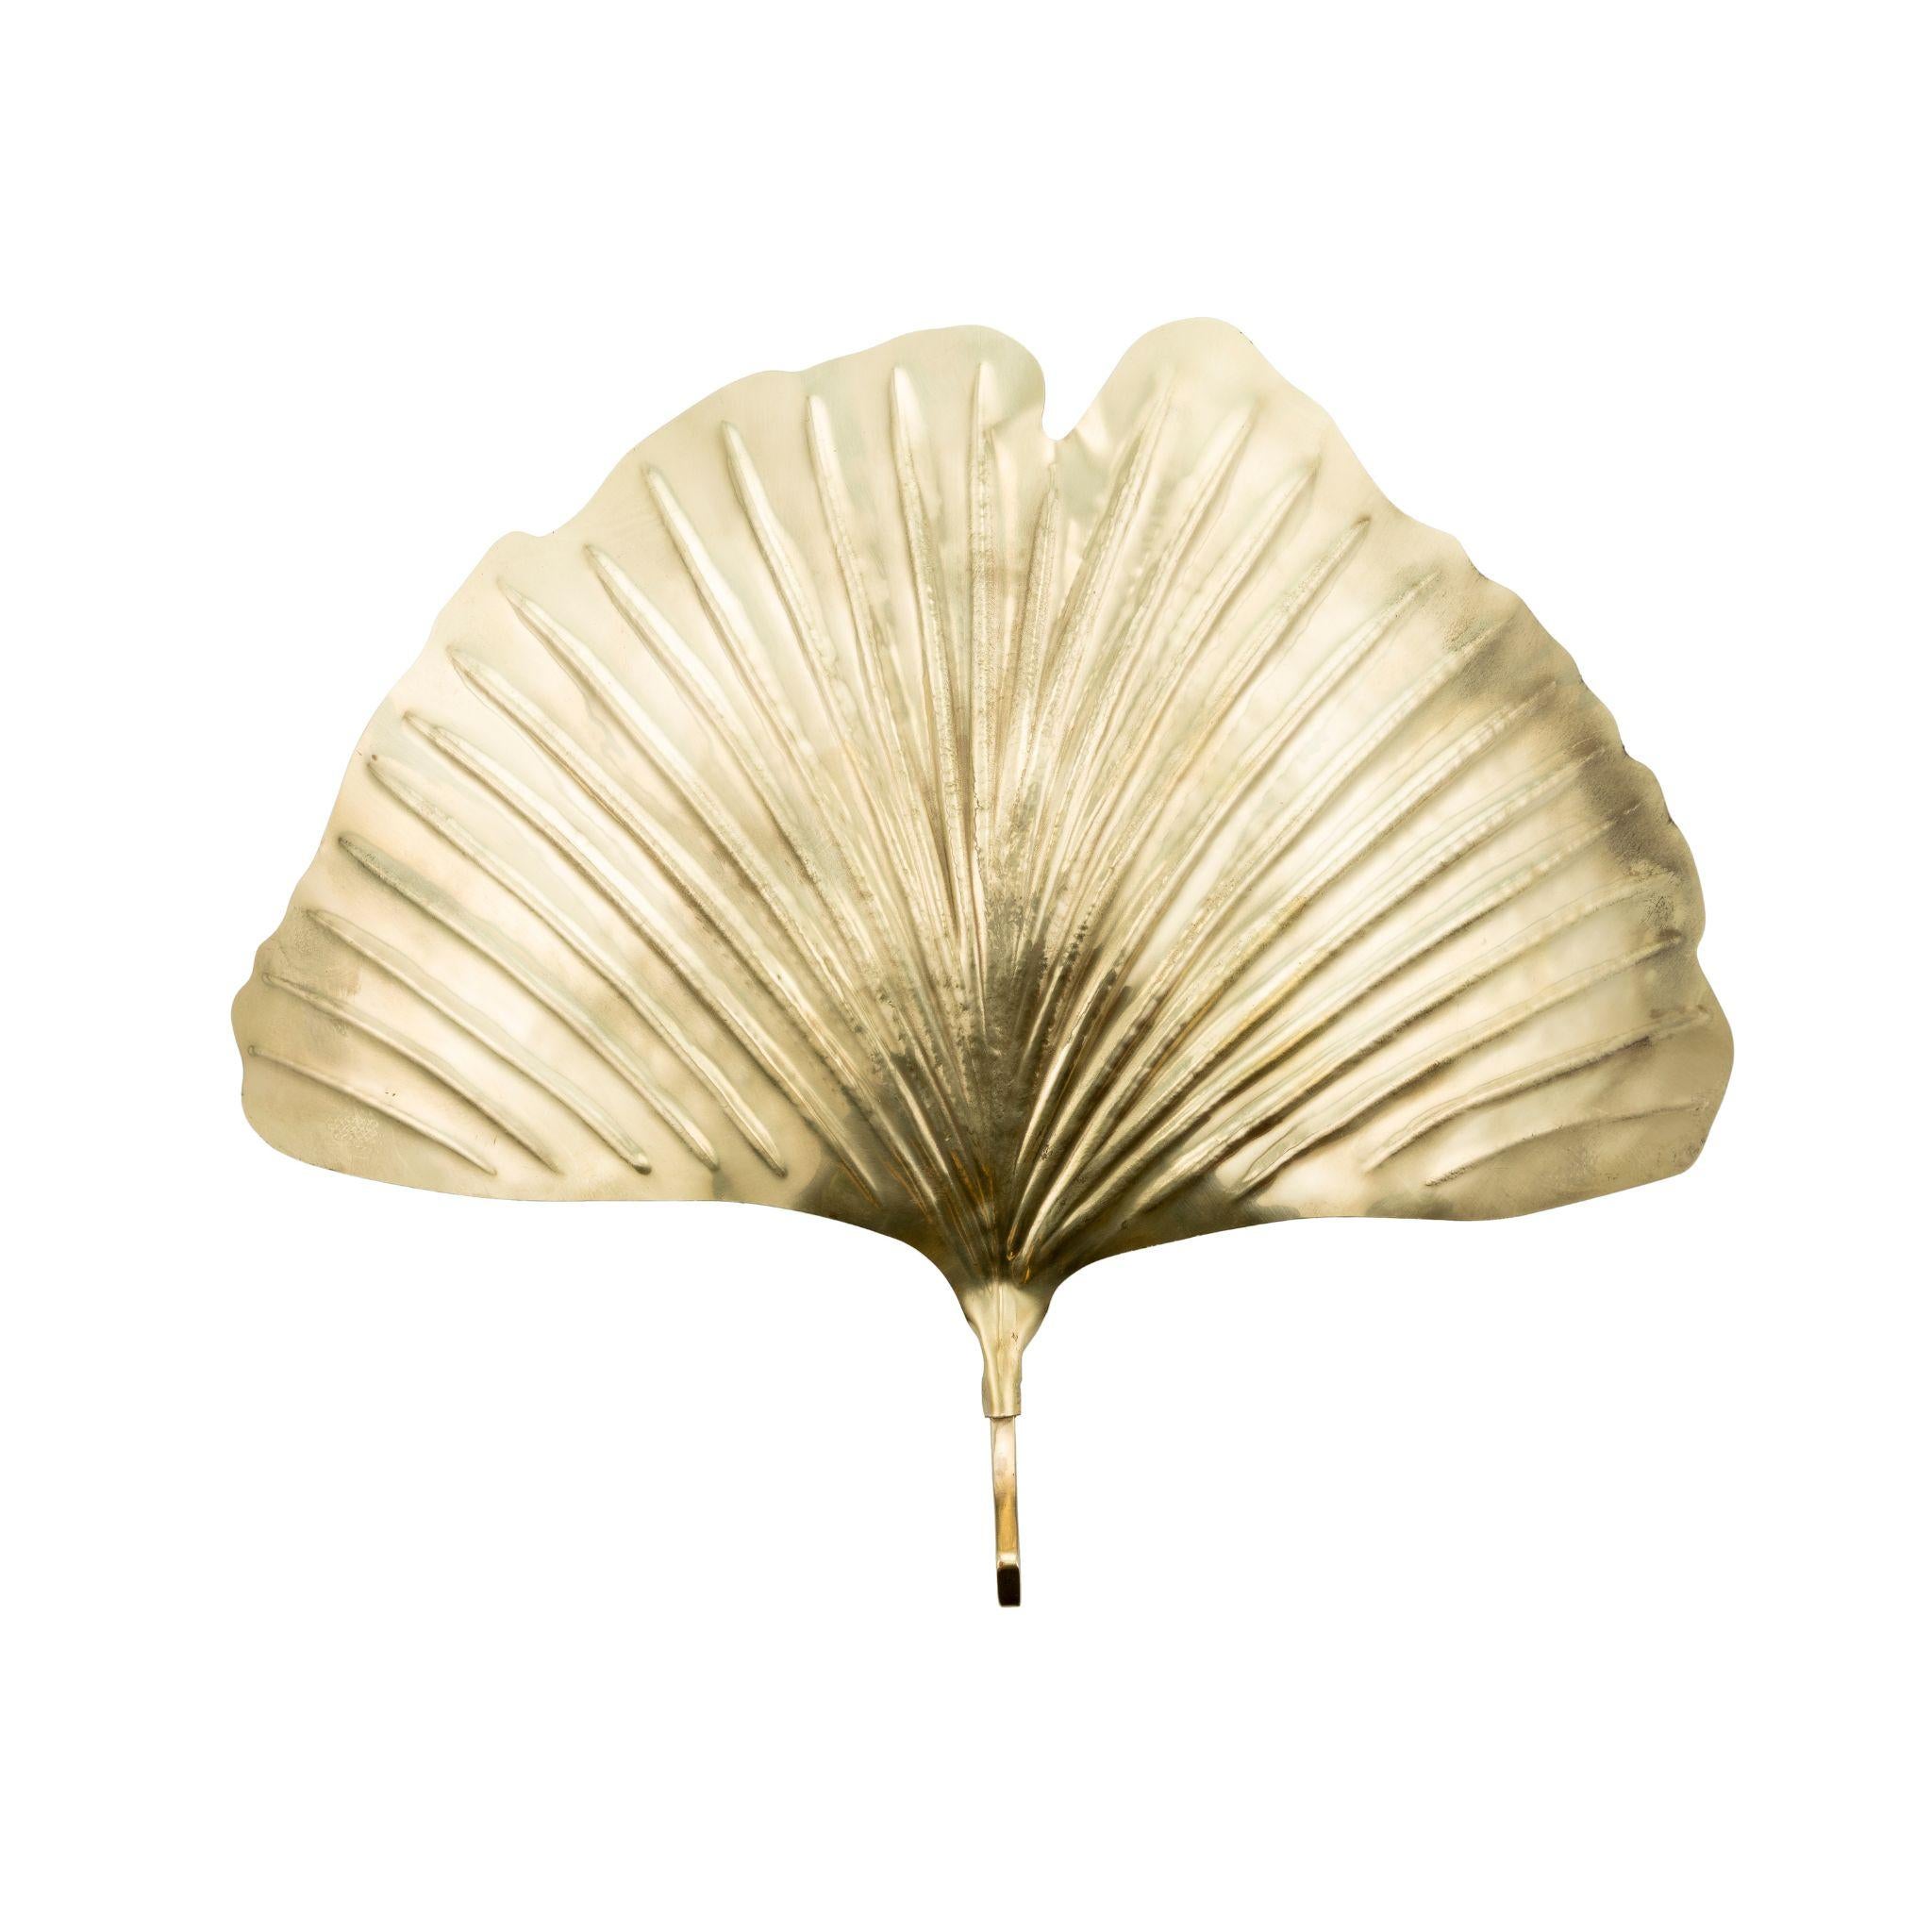 Introduce a touch of elegance with the Hortus Gingko Leaf Wall Light. Crafted with meticulous attention to detail, this exquisite wall light showcases the timeless beauty of the gingko leaf. Made from high-quality materials, it features intricate